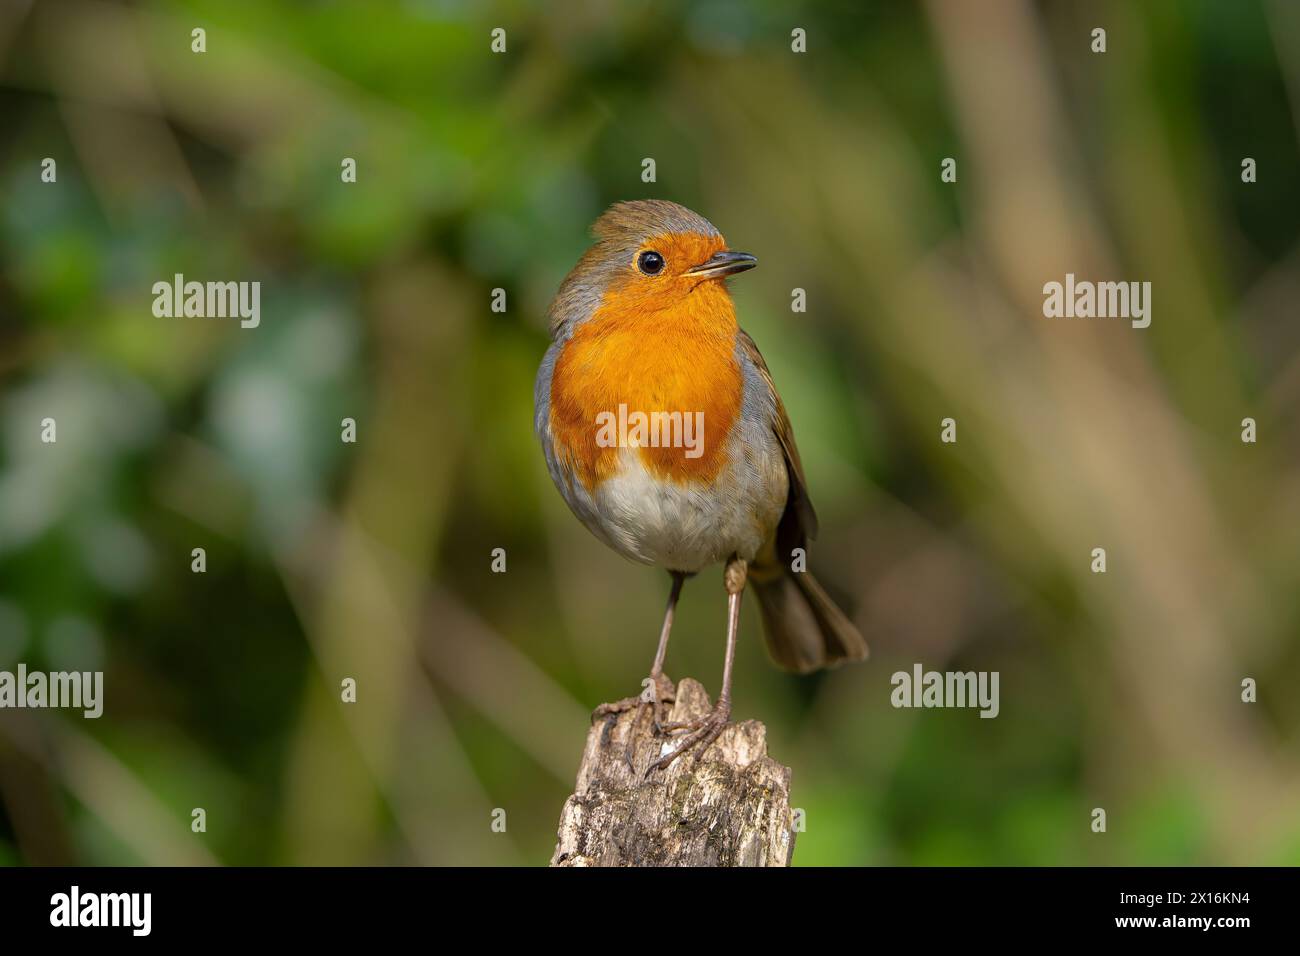 Front view of a robin bird stretching upwards in an alert state. Stock Photo